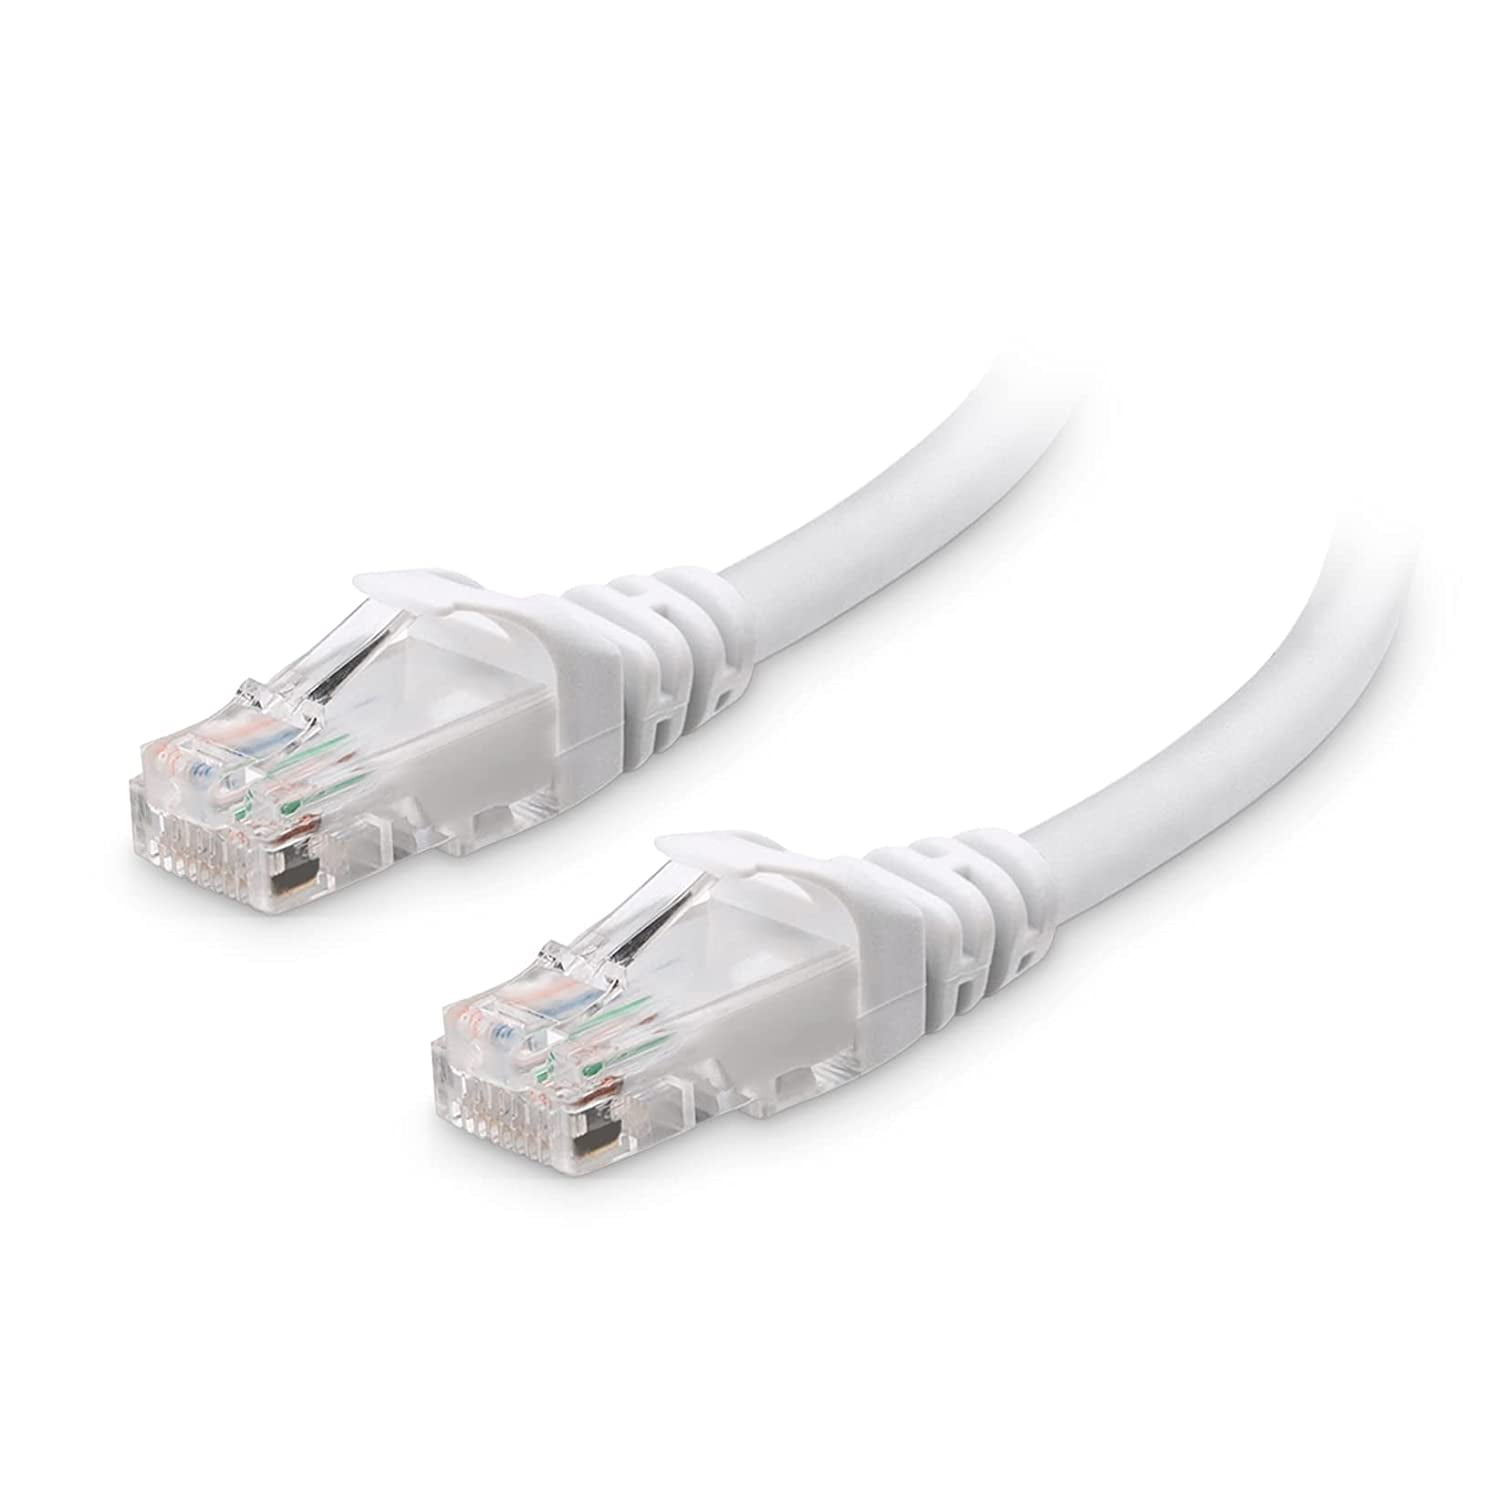 Available 1FT Cable Matters Snagless Cat6 Ethernet Cable Cat6 Cable/Cat 6 Cable 150FT in Length in White 25 Feet 